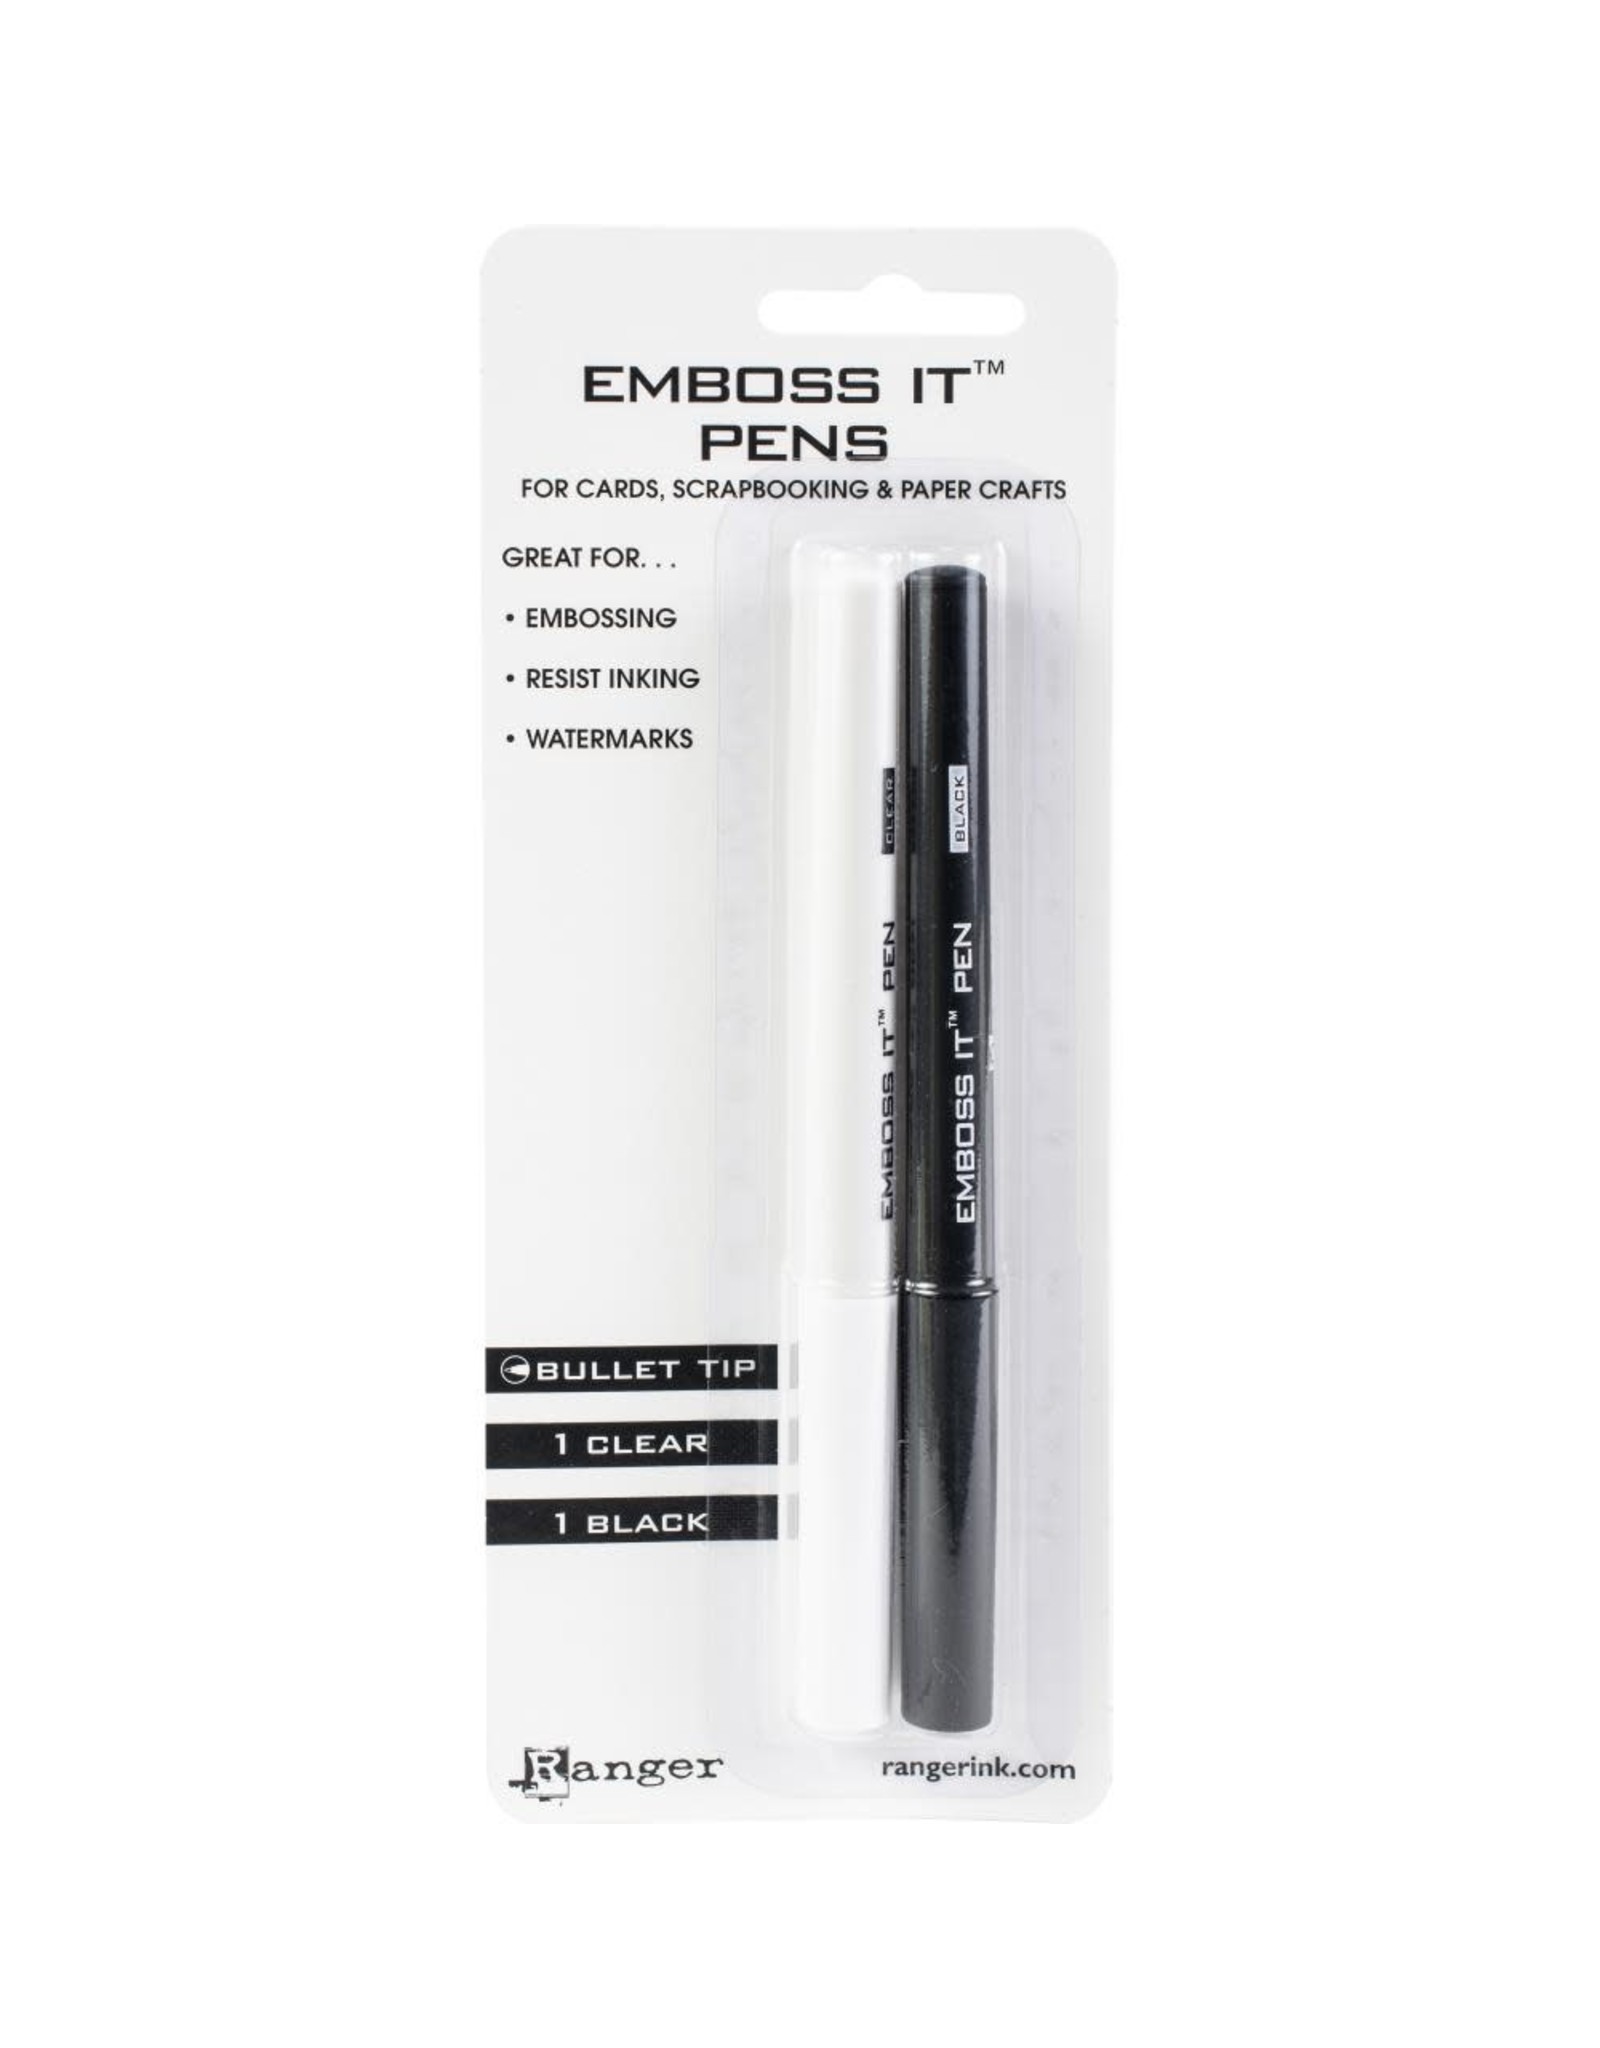 Ranger EMBOSS IT PENS - BLACK AND CLEAR